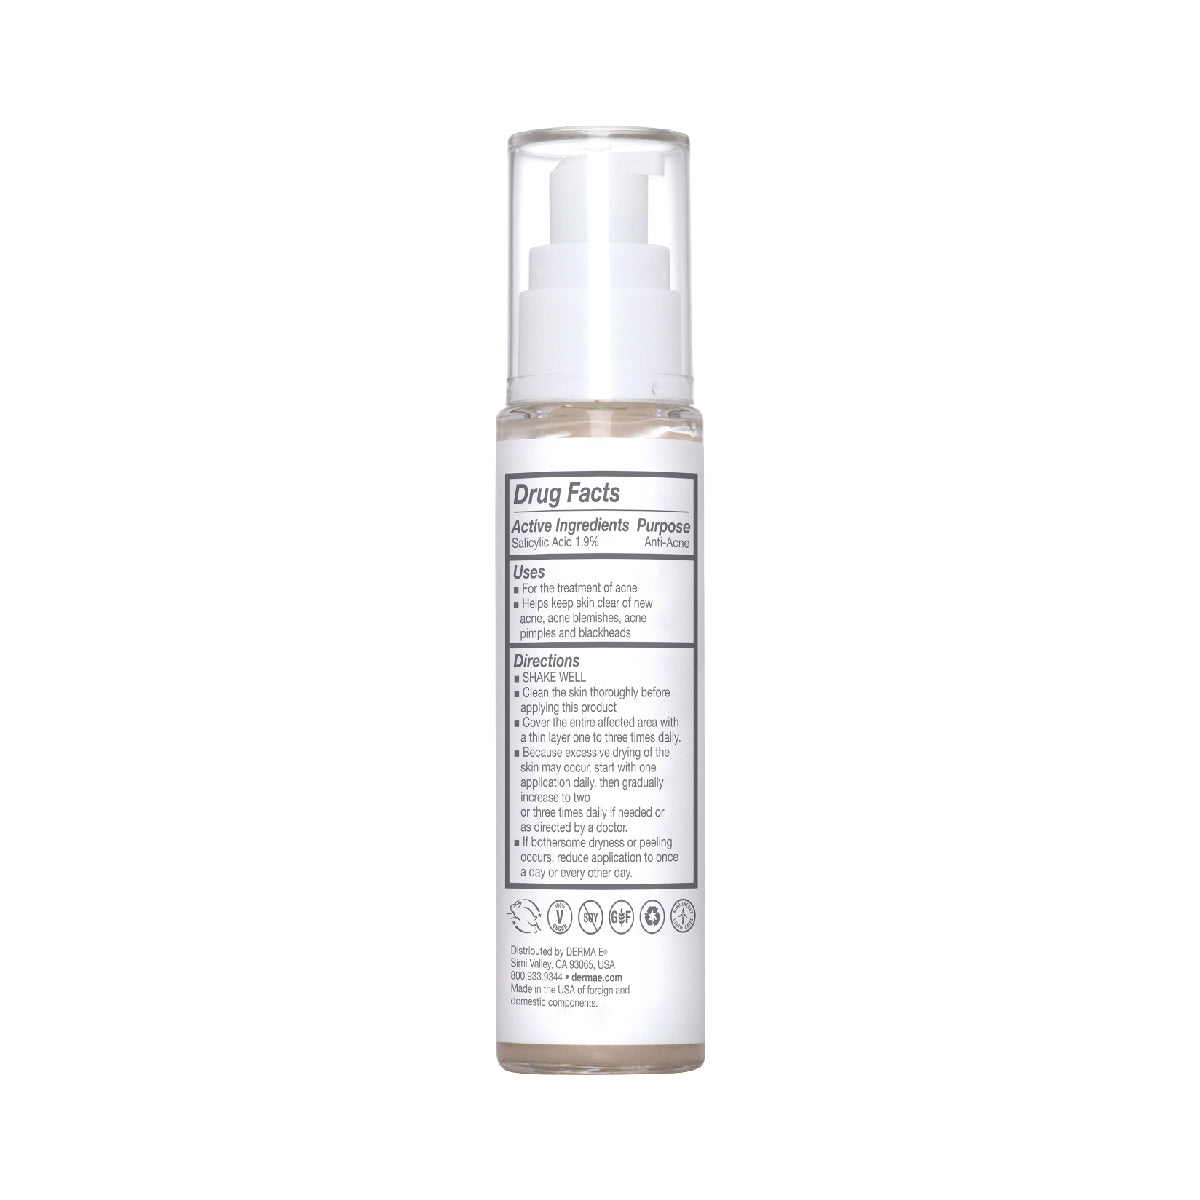 Back view of the Acne Treatment Serum bottle by DERMA E, displaying the ingredient list and usage instructions